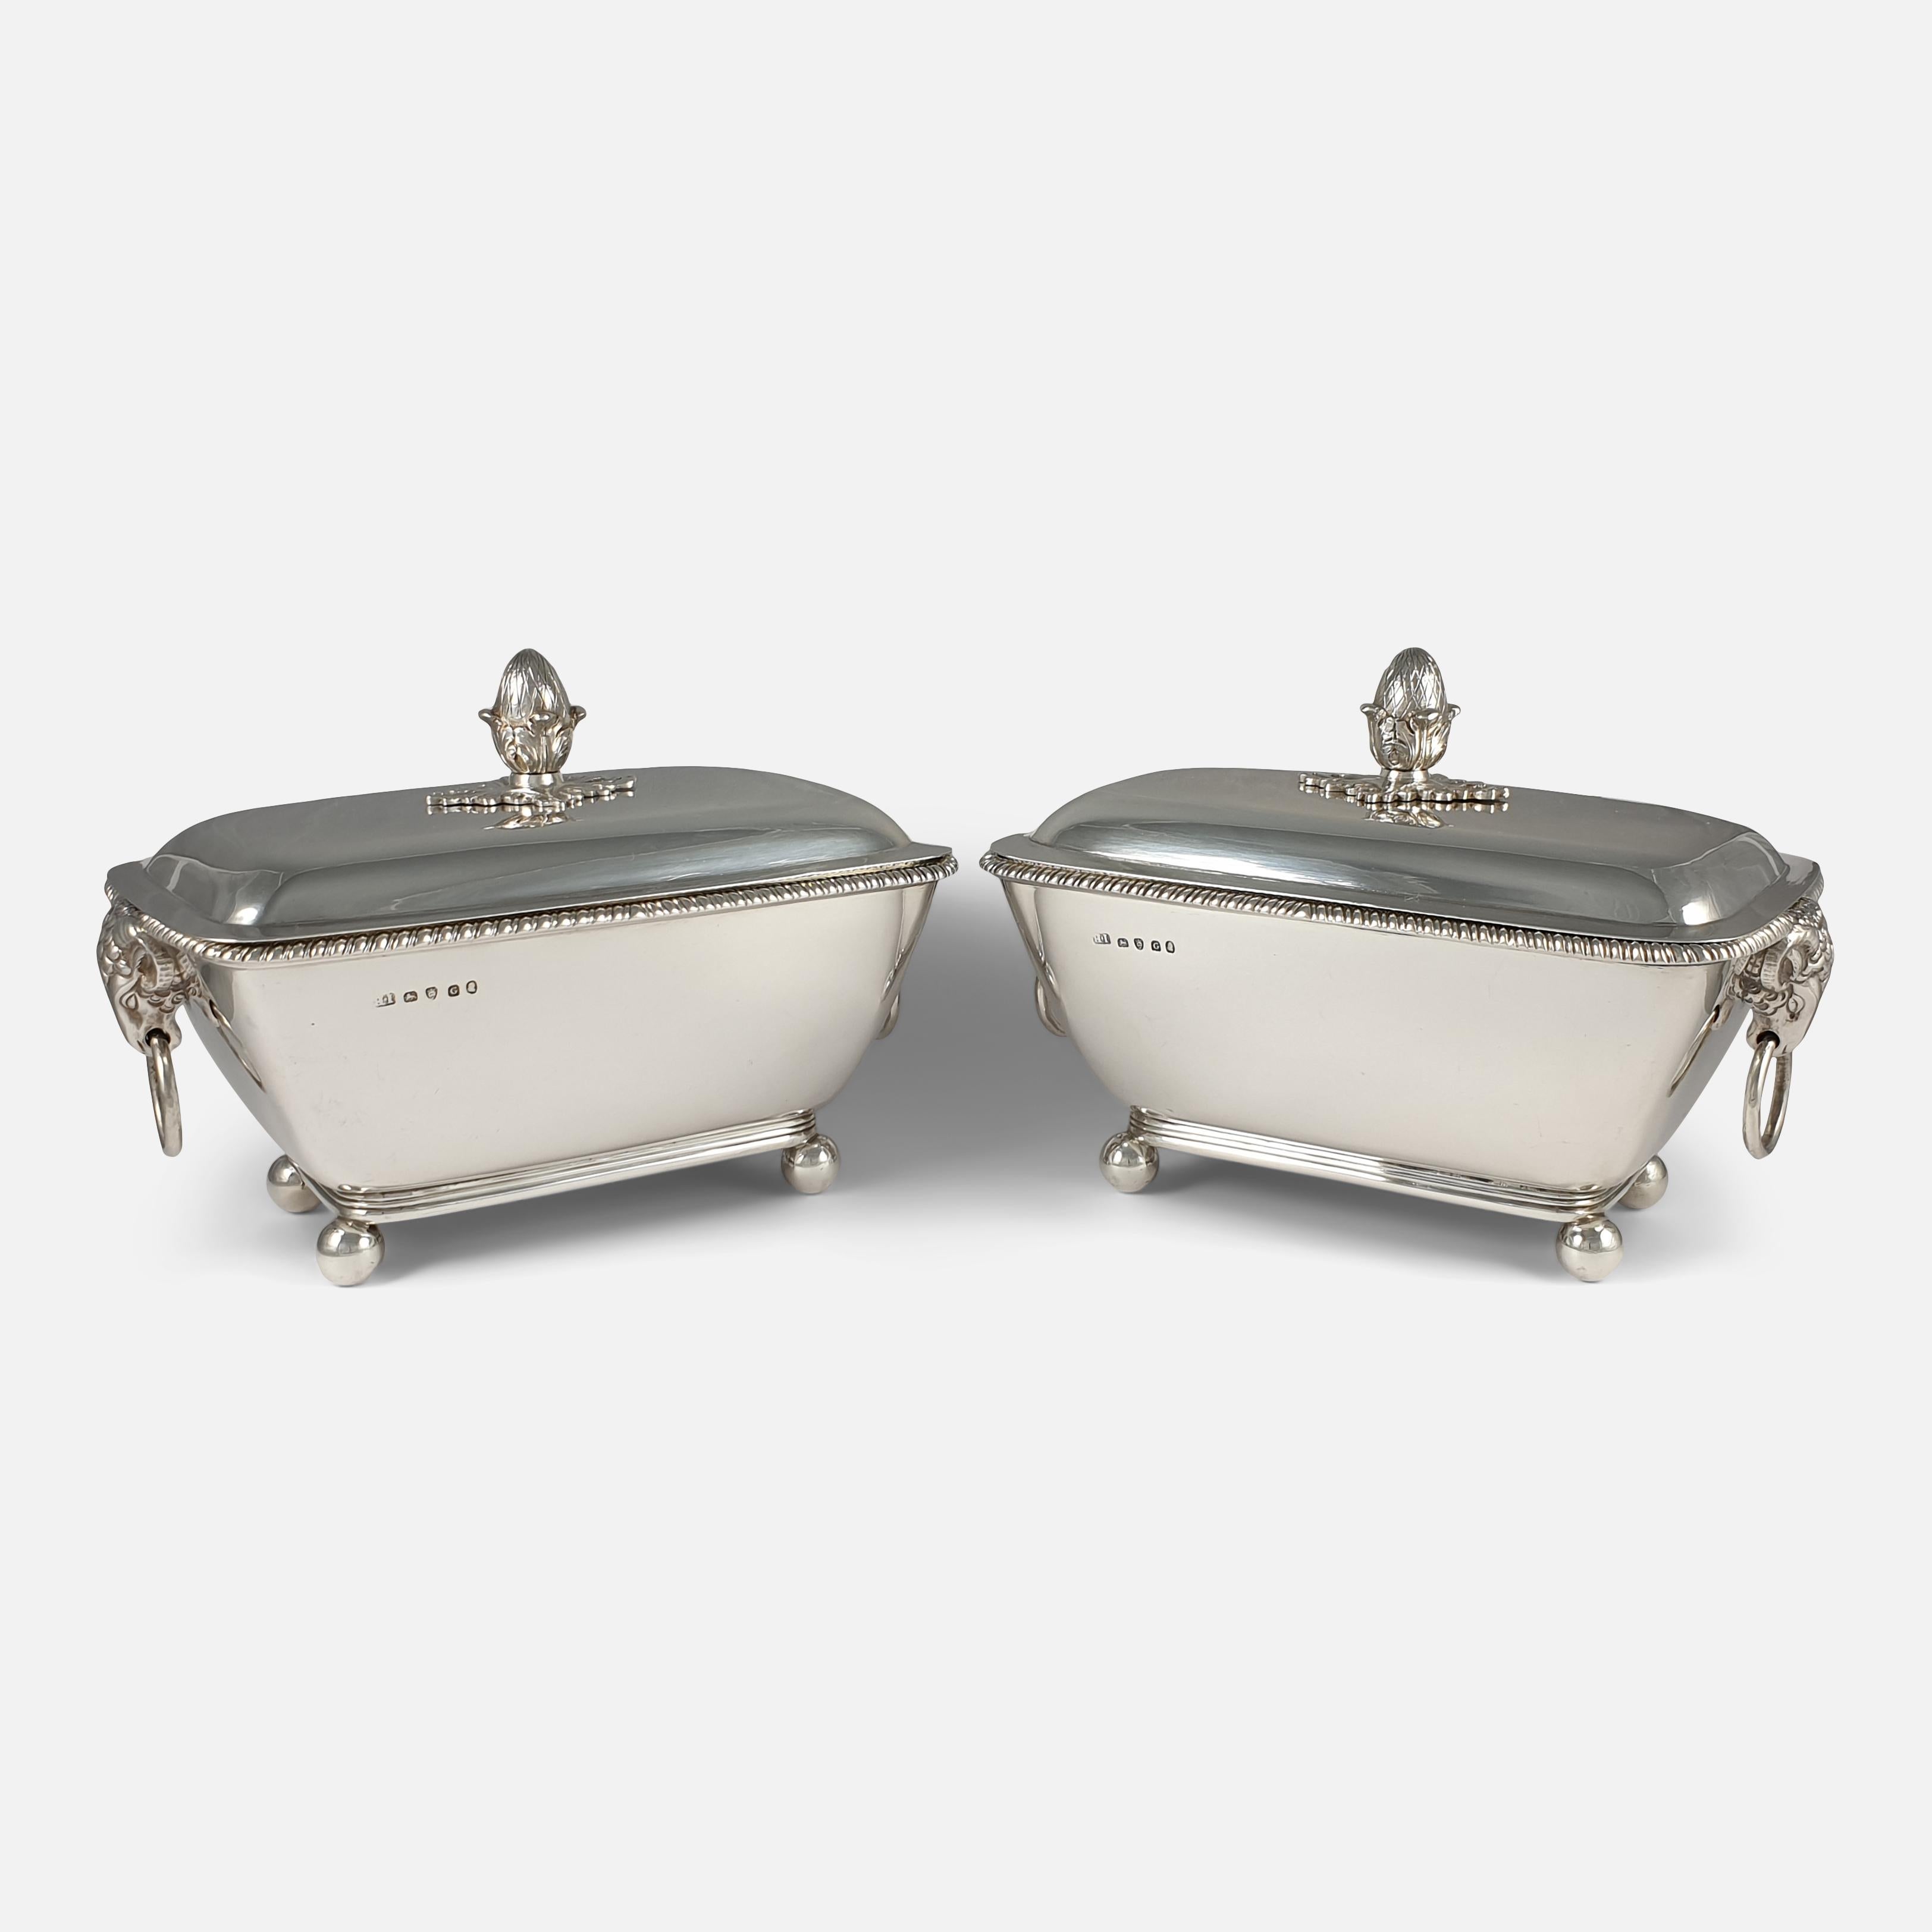 Pair of George III Silver Sauce Tureens and Covers, John Robins, London, 1802 For Sale 4